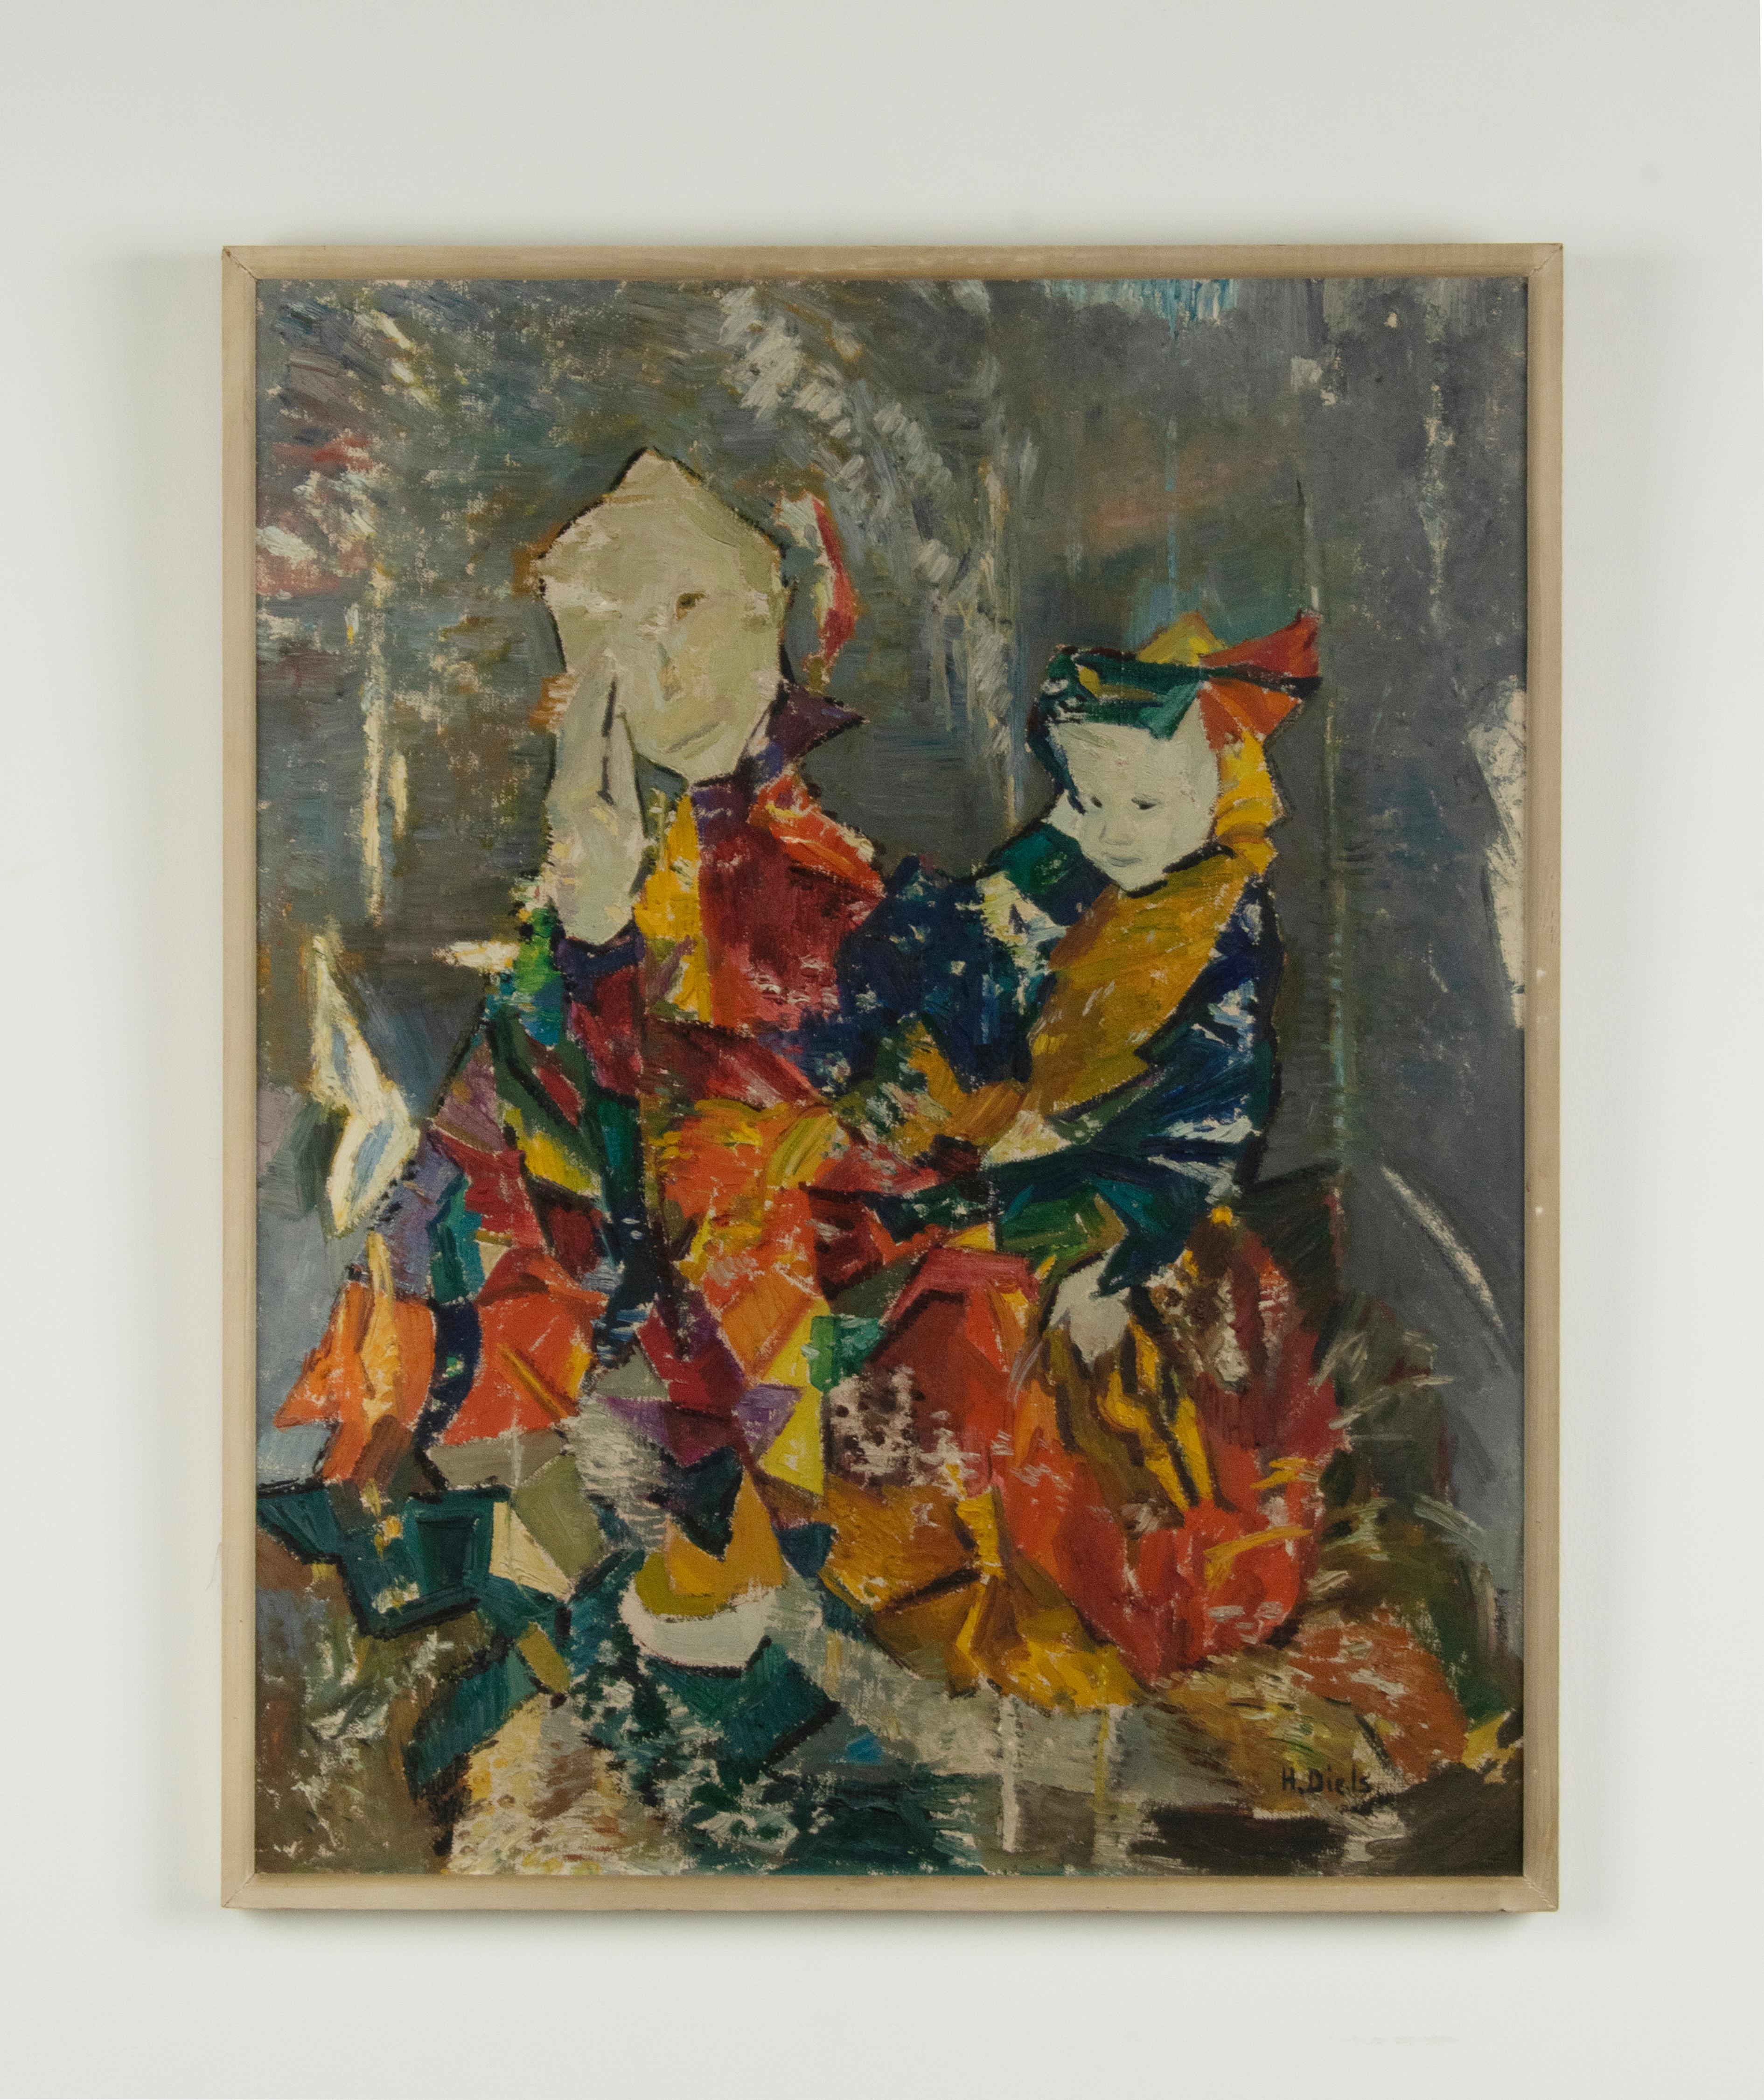 A beautiful Mid-Century Modern oil painting by the Flemish artist Herman Diels.
The painting depicts a mother with child. The use of color and the angular shapes are striking.
The painting is in good condition. It is framed in a simple pinewood